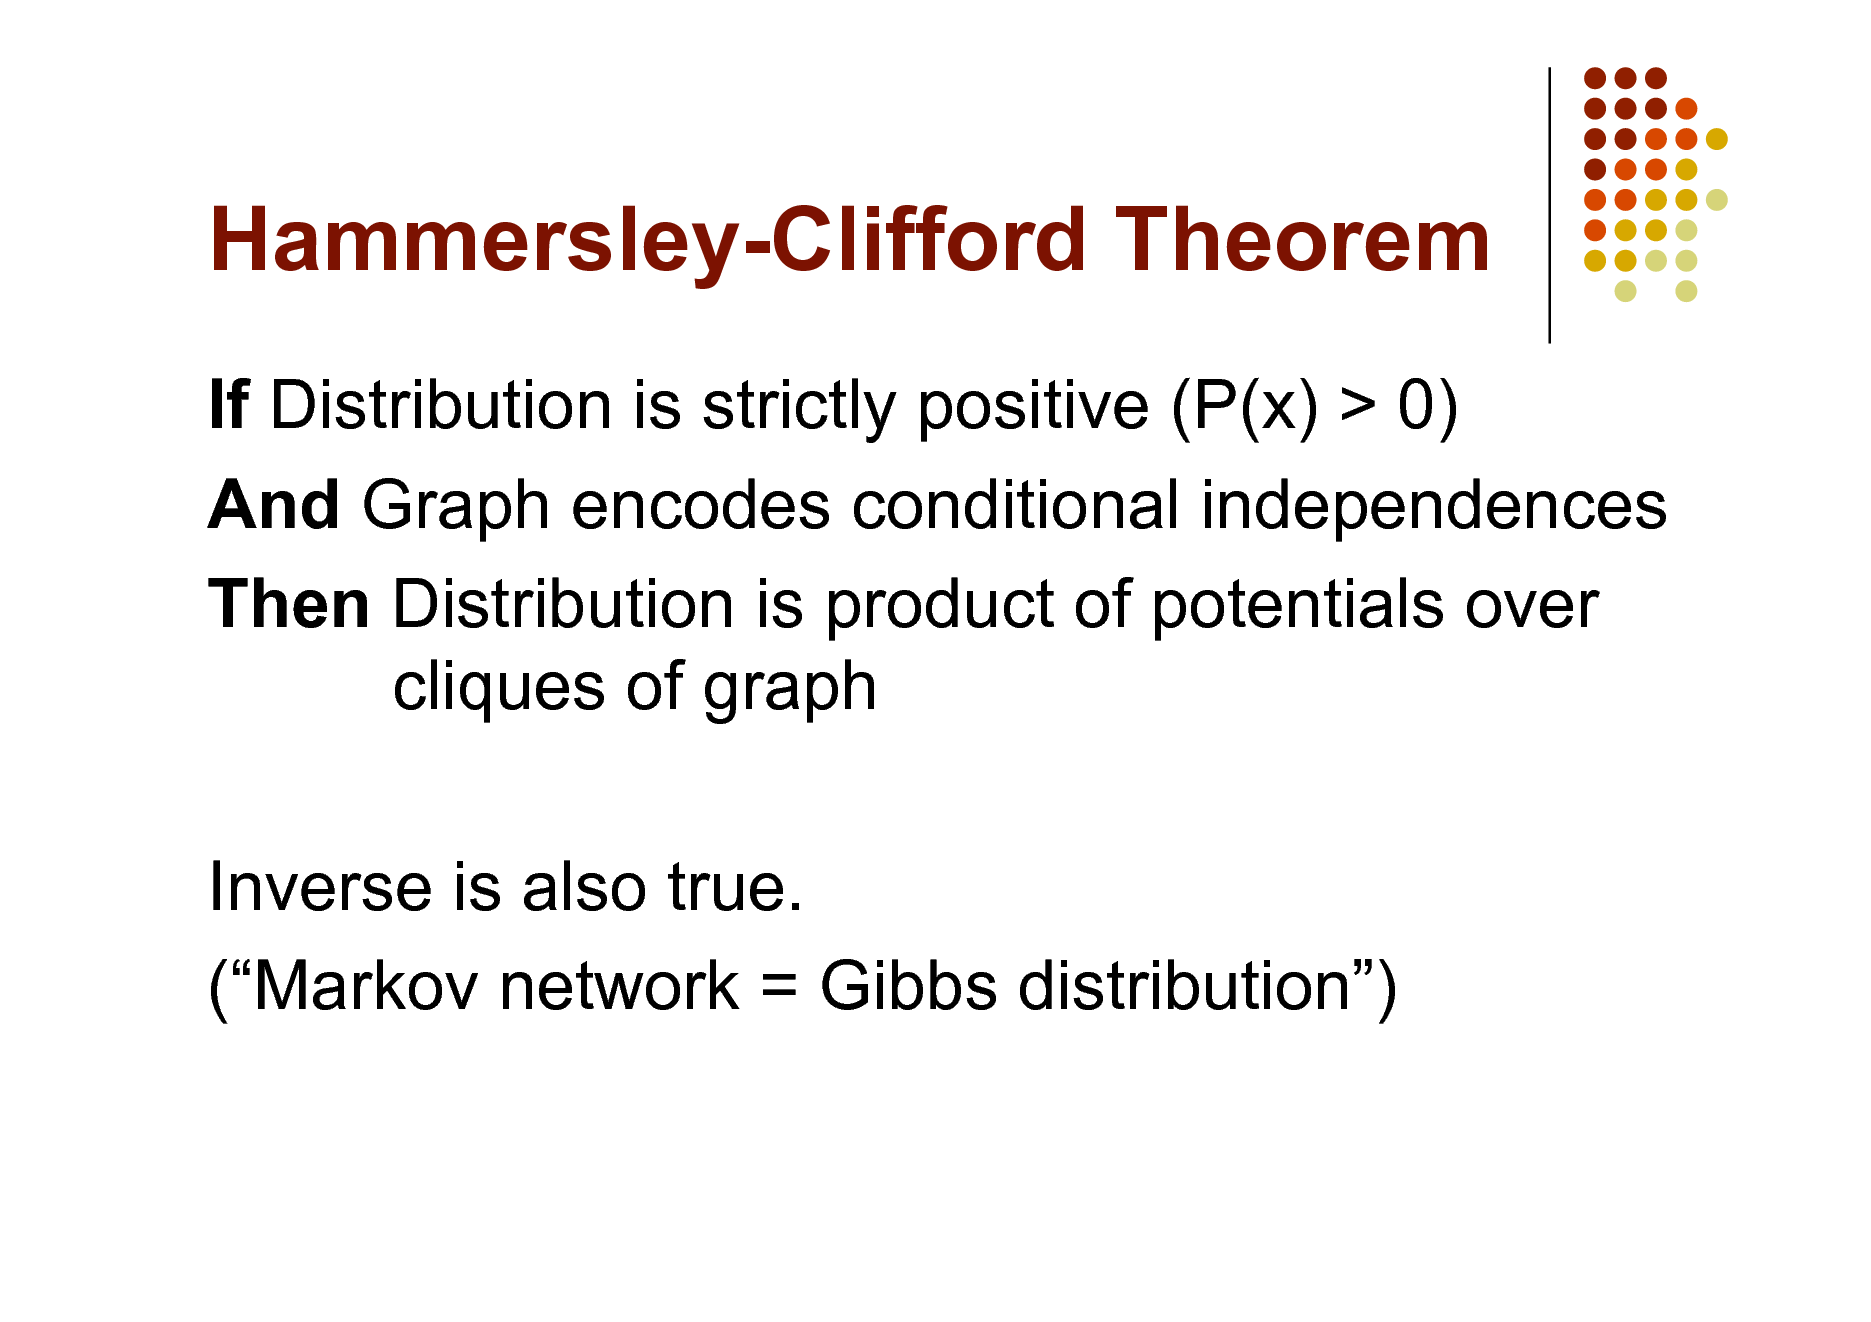 Slide: Hammersley-Clifford Theorem
If Distribution is strictly positive (P(x) > 0) And Graph encodes conditional independences Then Distribution is product of potentials over cliques of graph Inverse is also true. (Markov network = Gibbs distribution)

